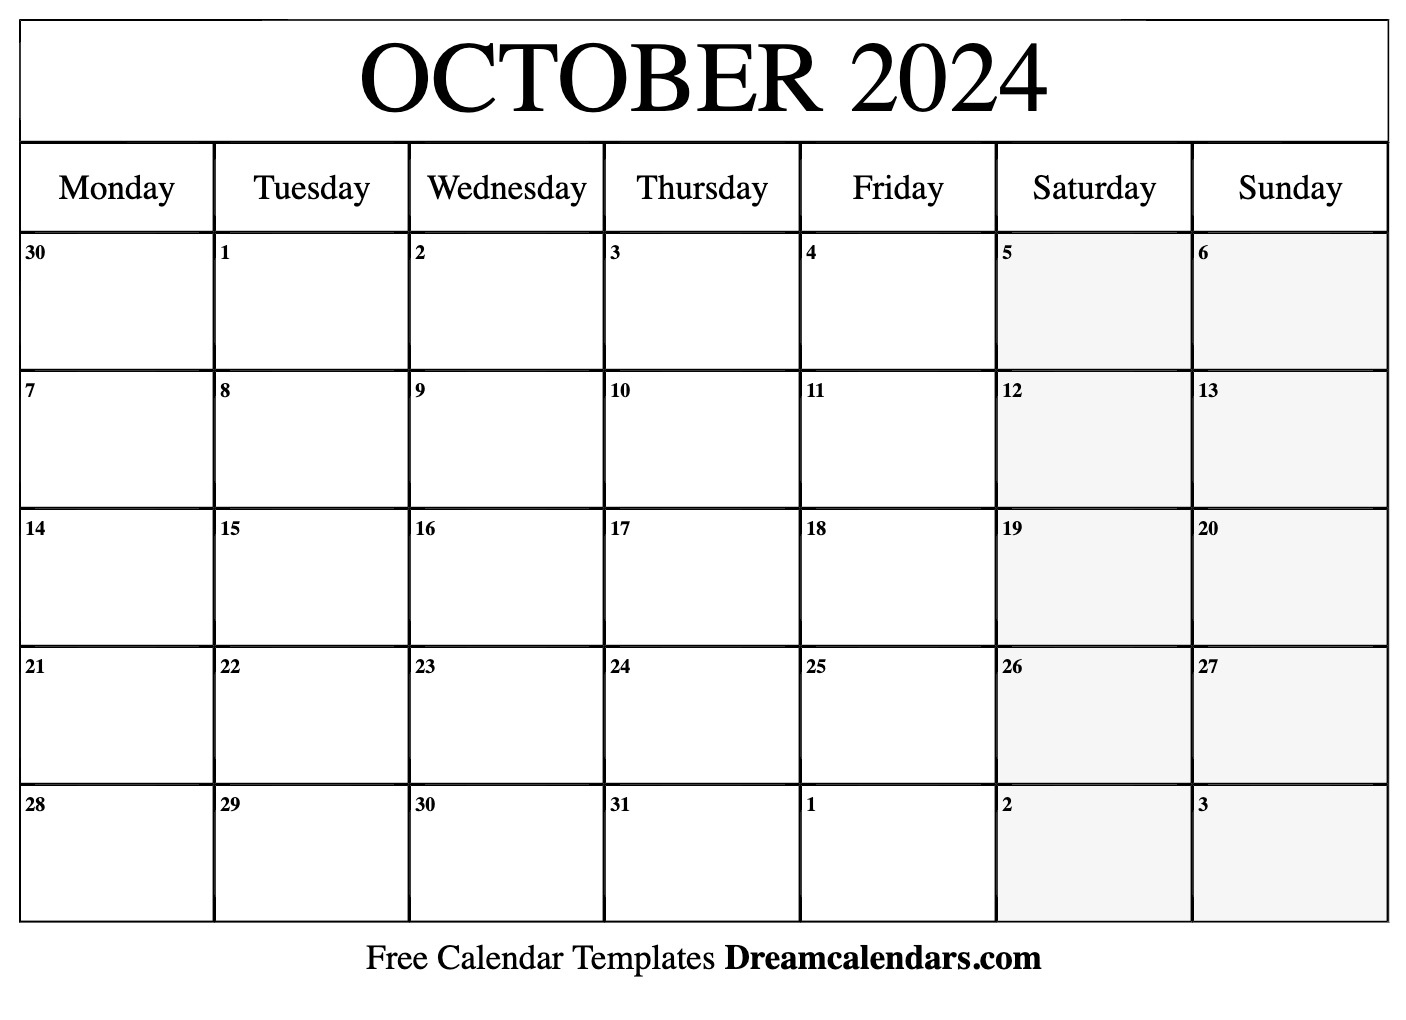 October 2024 Calendar | Free Blank Printable With Holidays inside Free Printable Blank Calendar October 2024